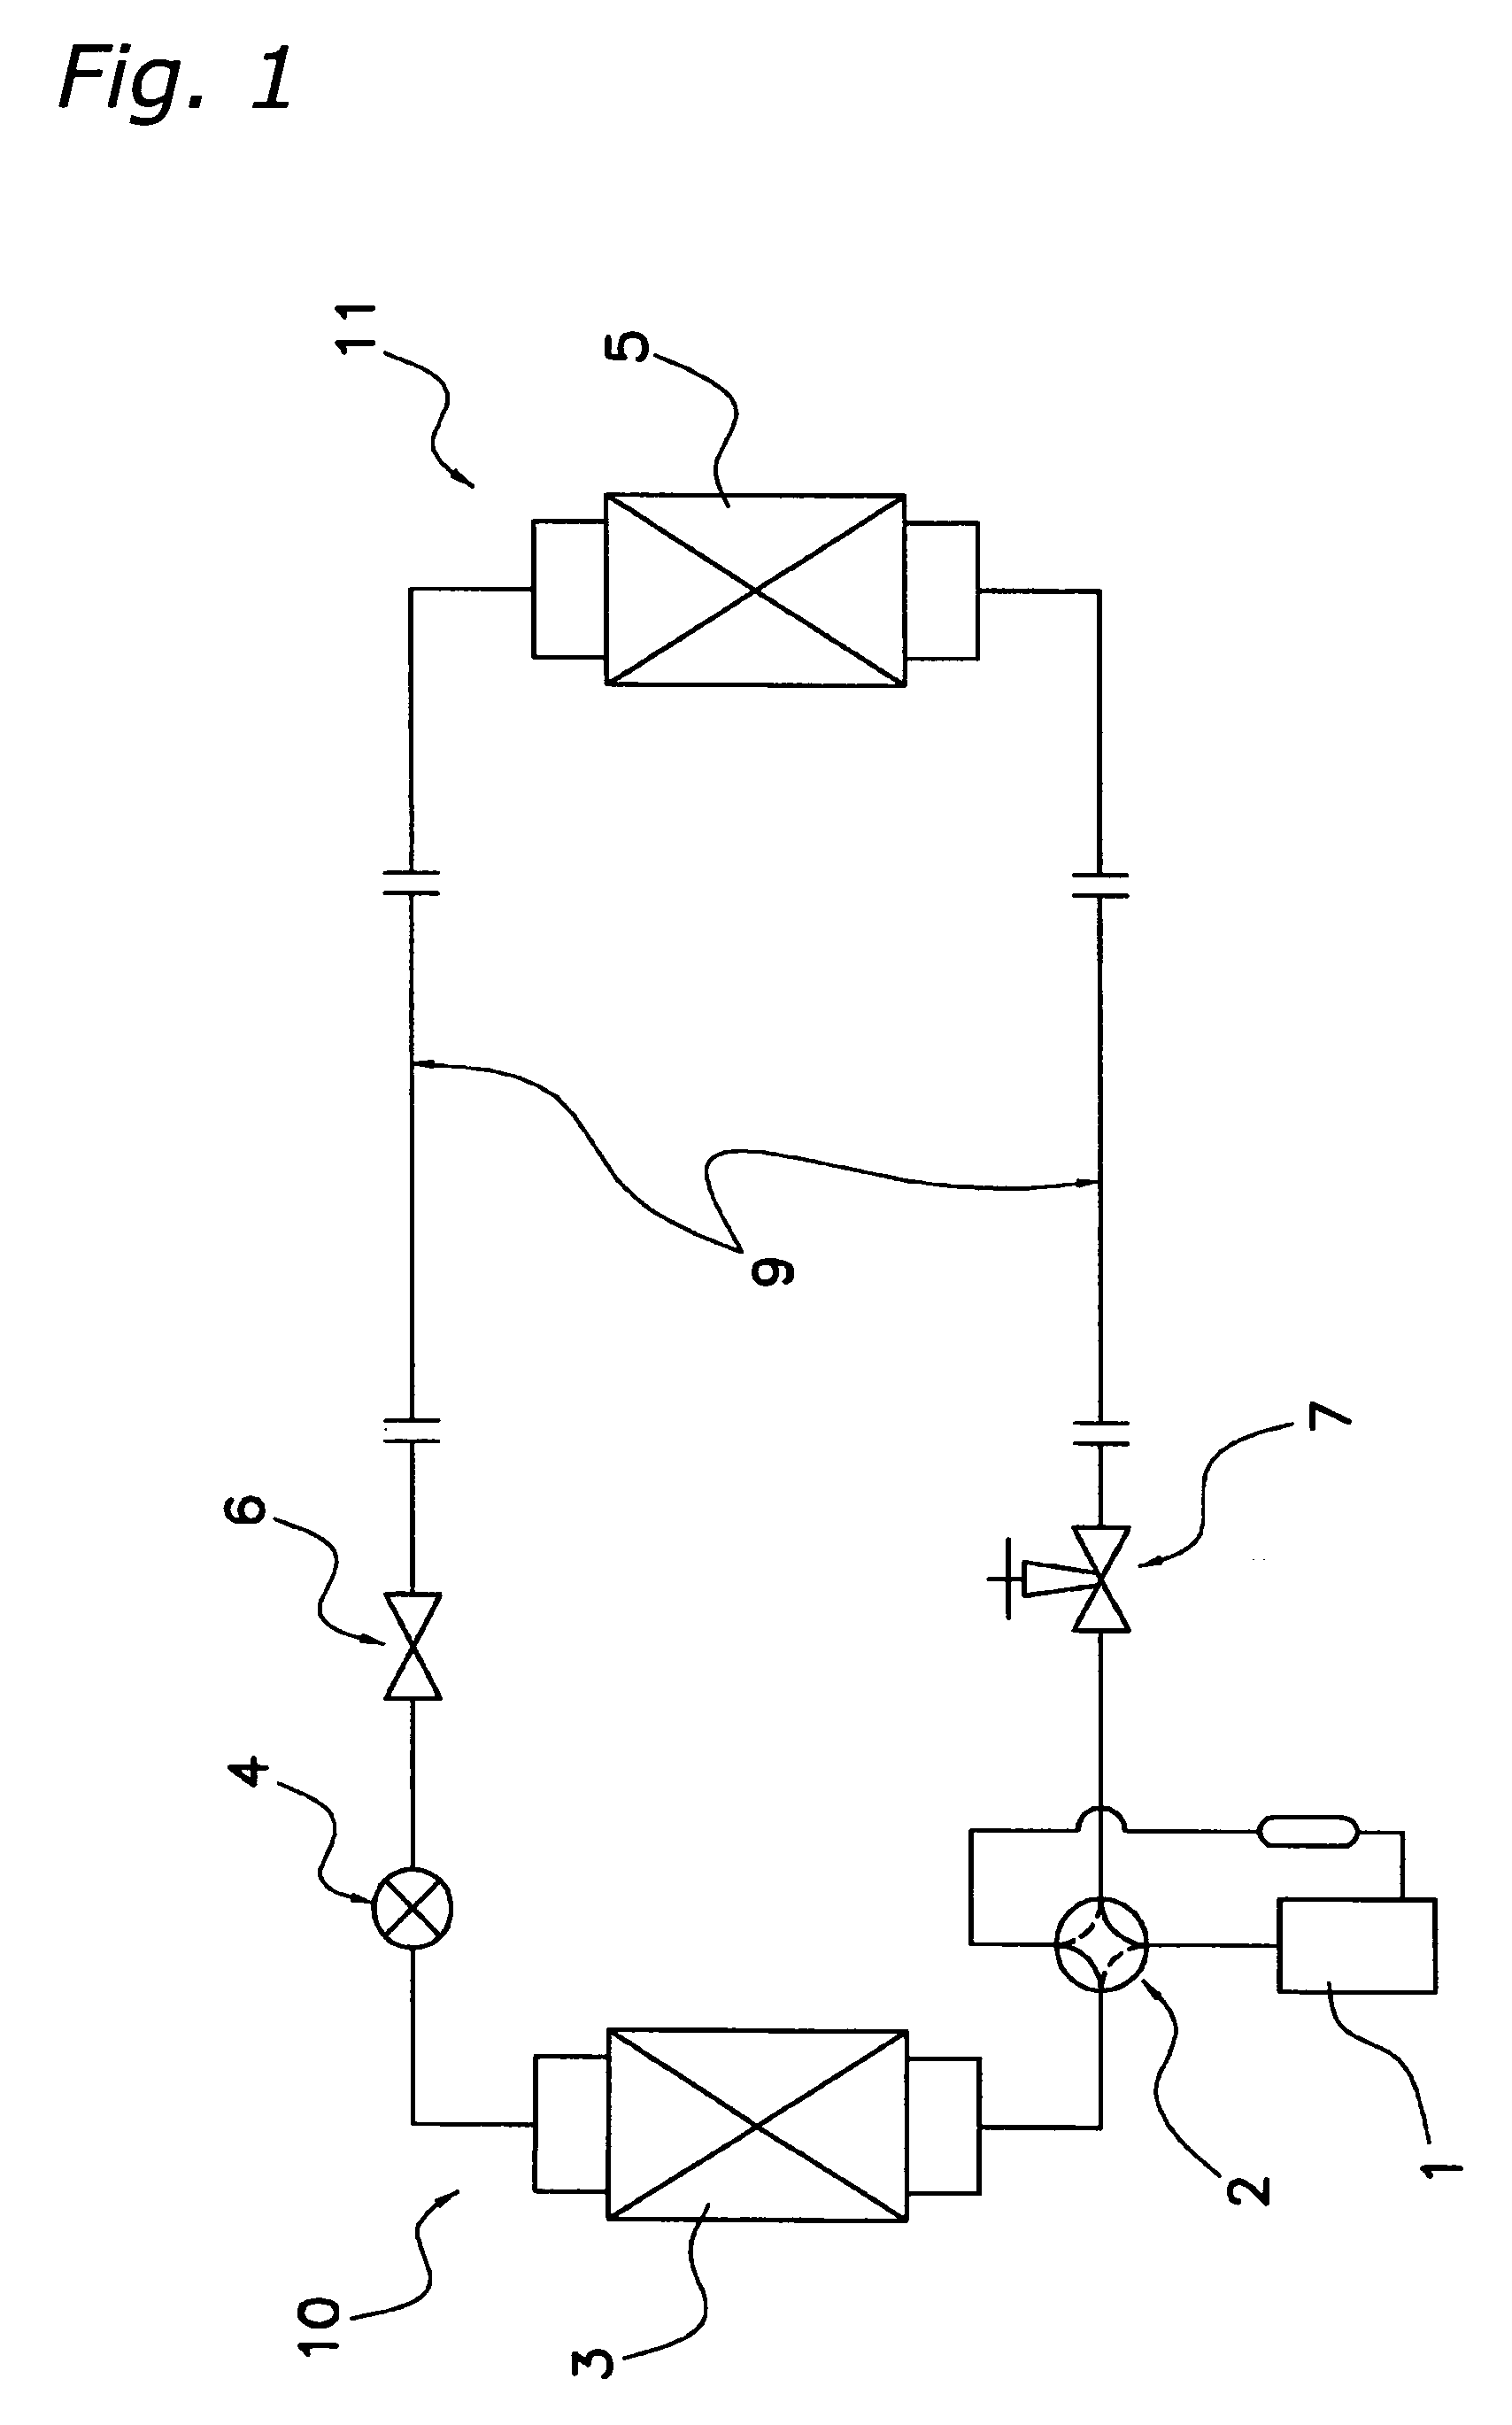 Method for determining reusability of refrigerant using equipment or refrigerant lines, and reusability check tool for refrigerant using equipment or refrigerant lines